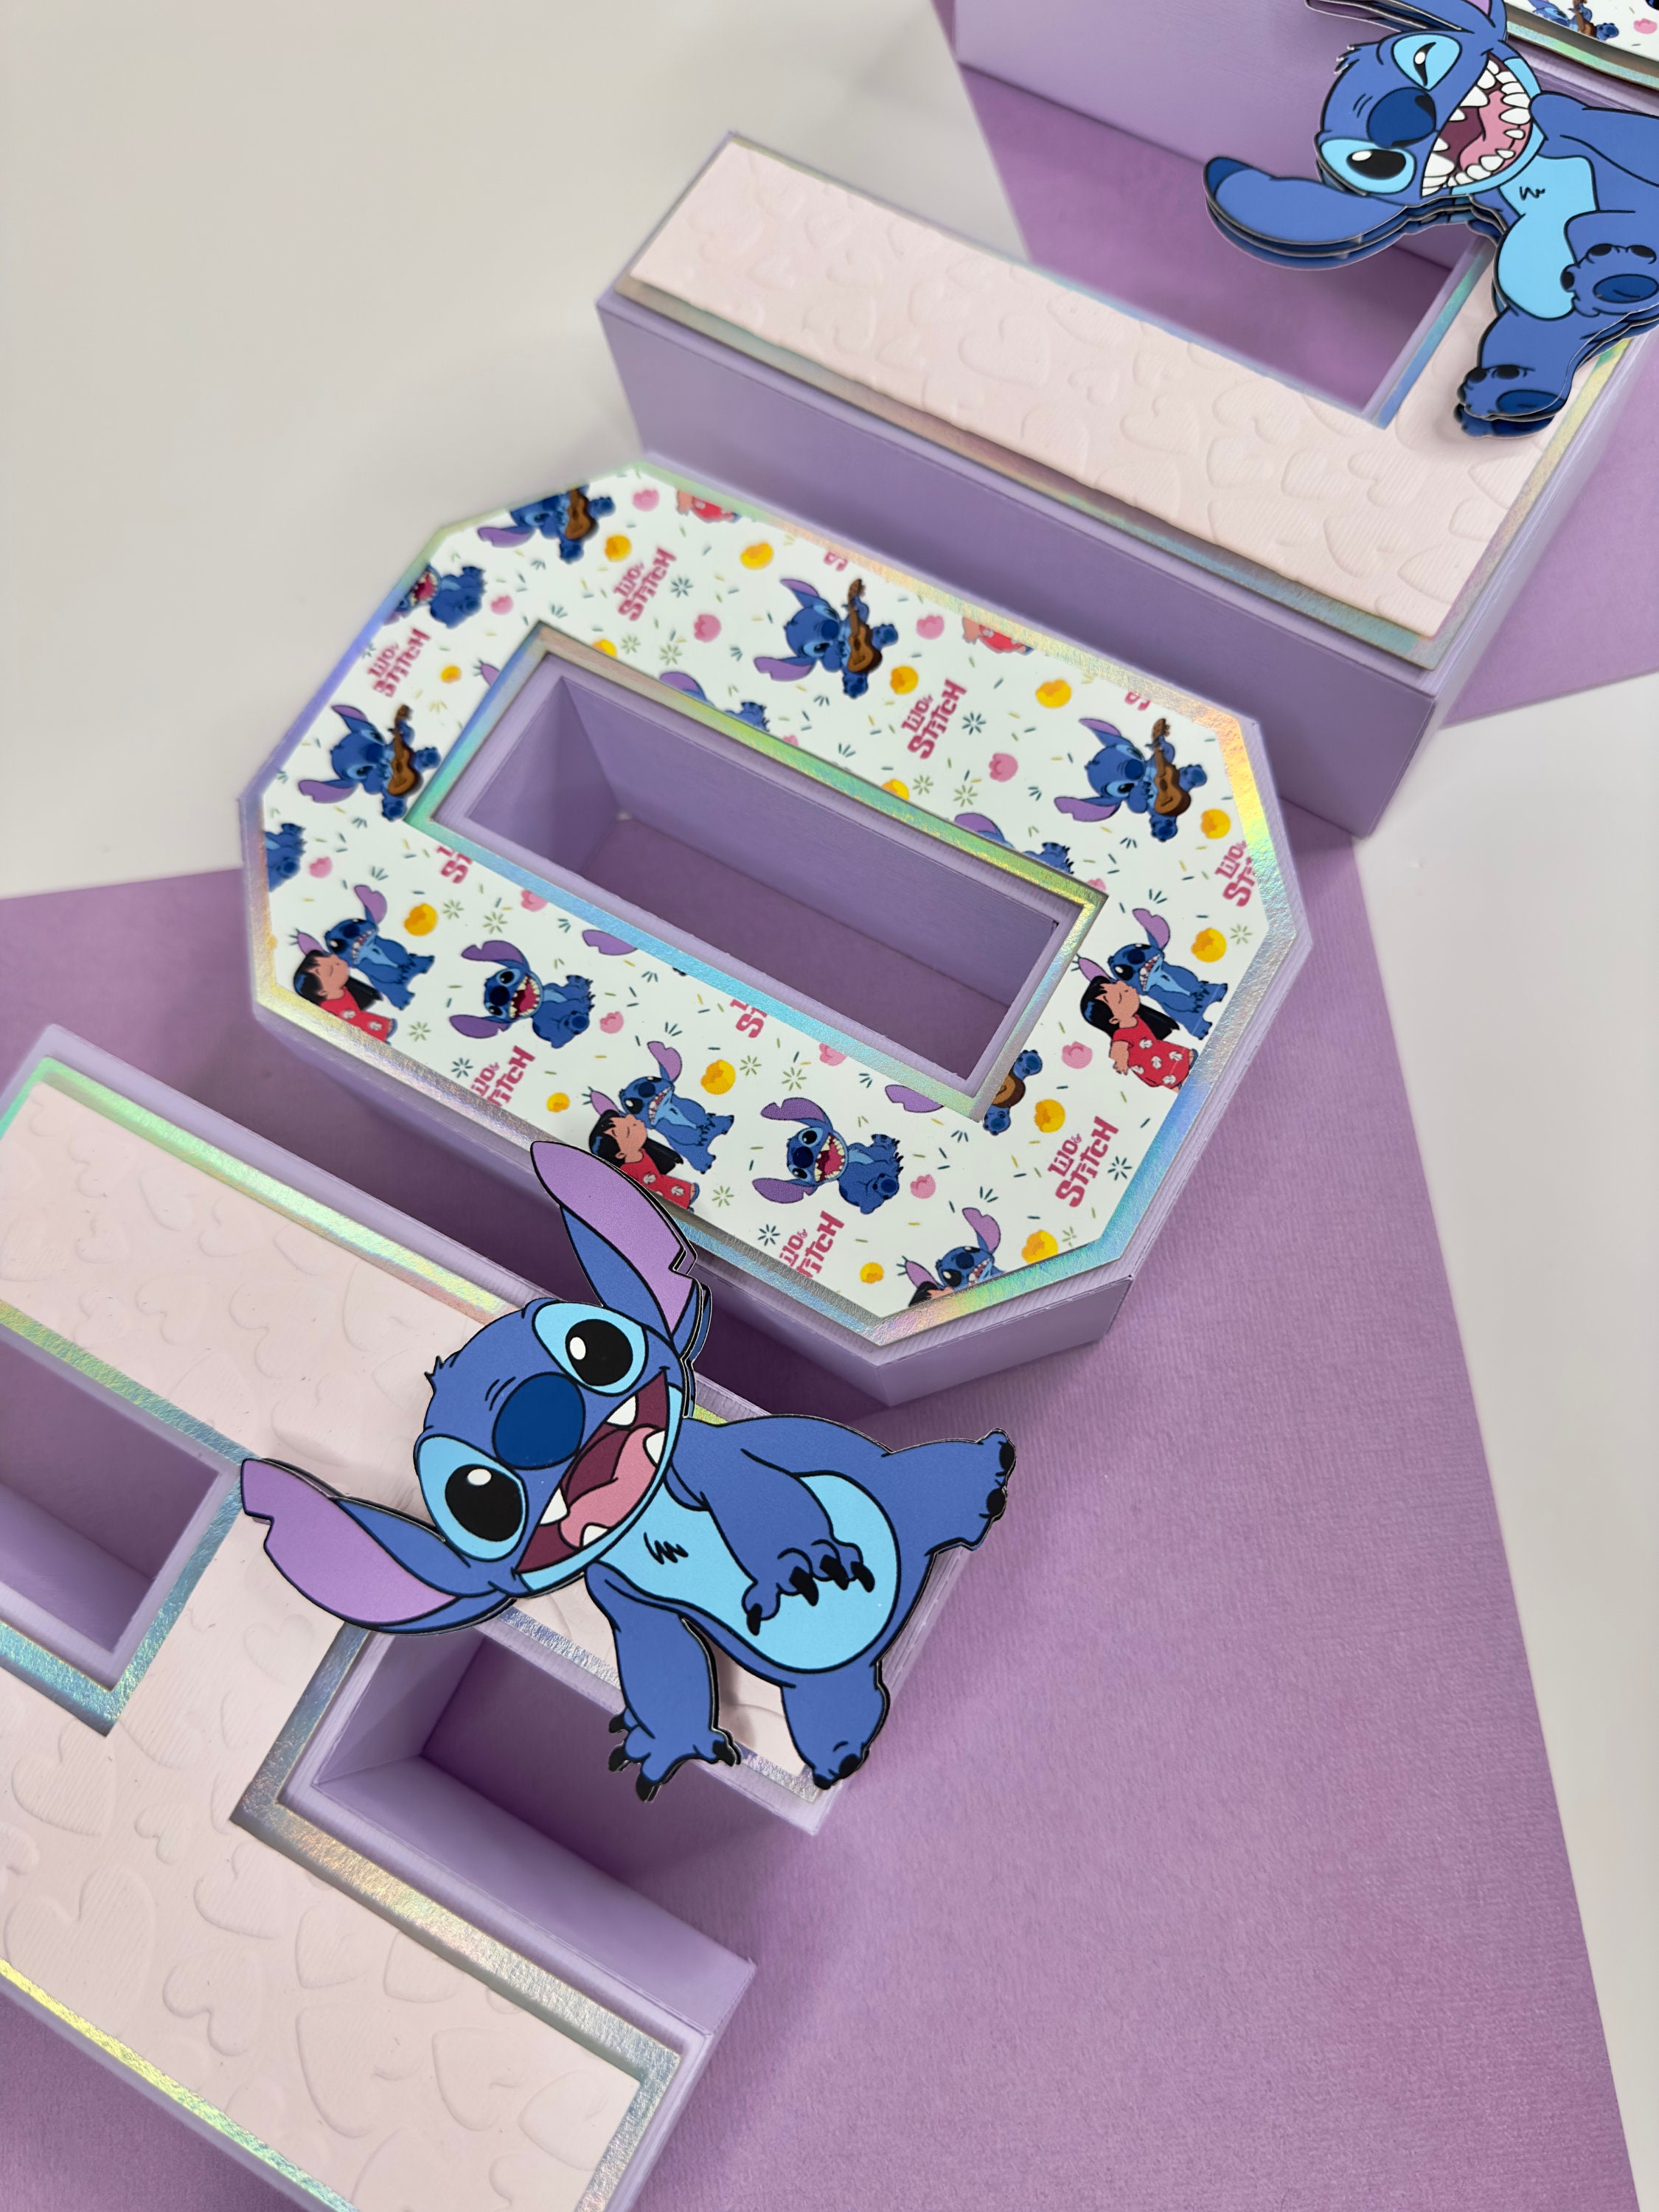 6-stitch Cupcake Topper, 1-stitch Cake Topper, Party Decor Stitch, Stitch  Themed, Stitch Inspired, Stitch Birthday Party, 